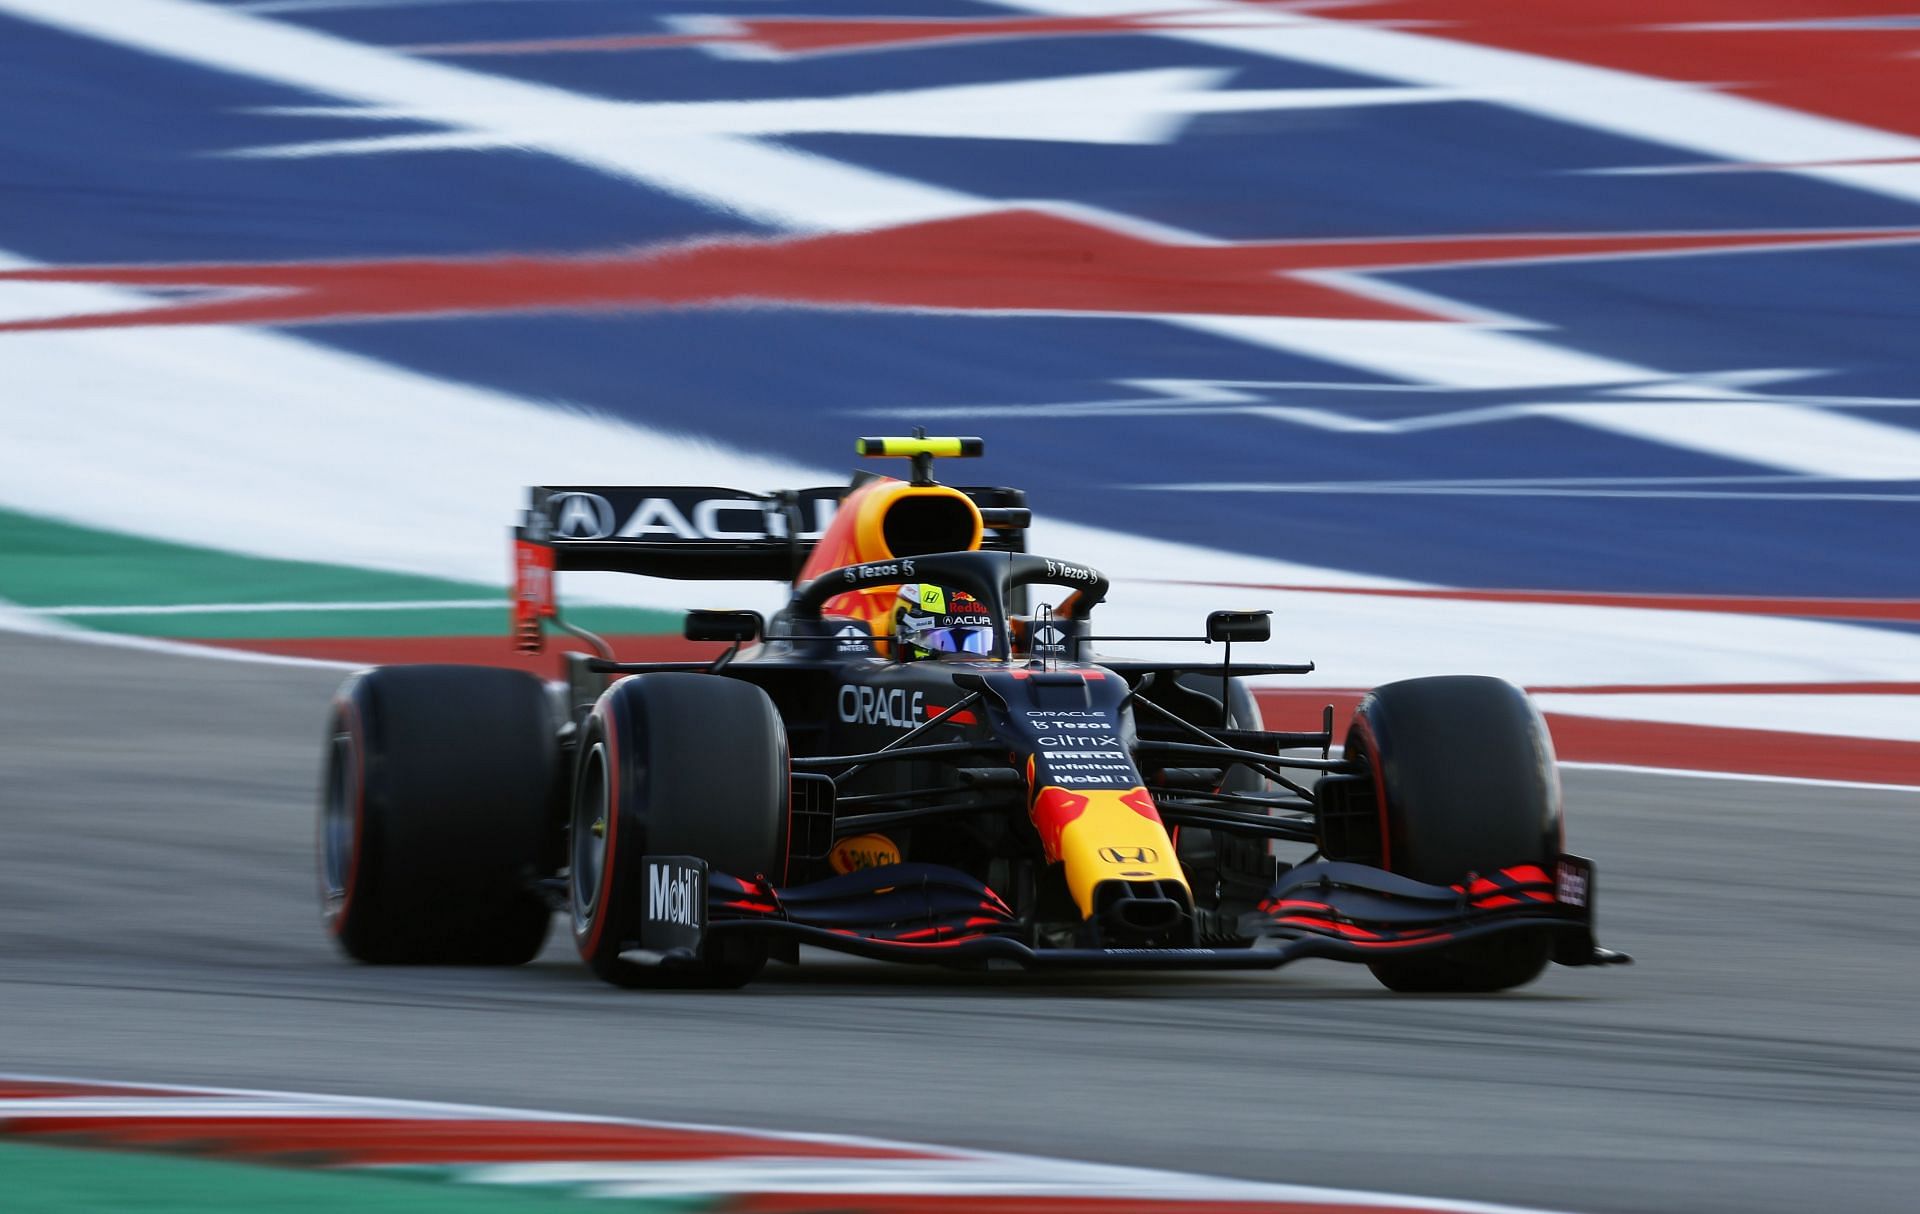 USGP FP2 results Perez fastest, followed by Norris and Hamilton